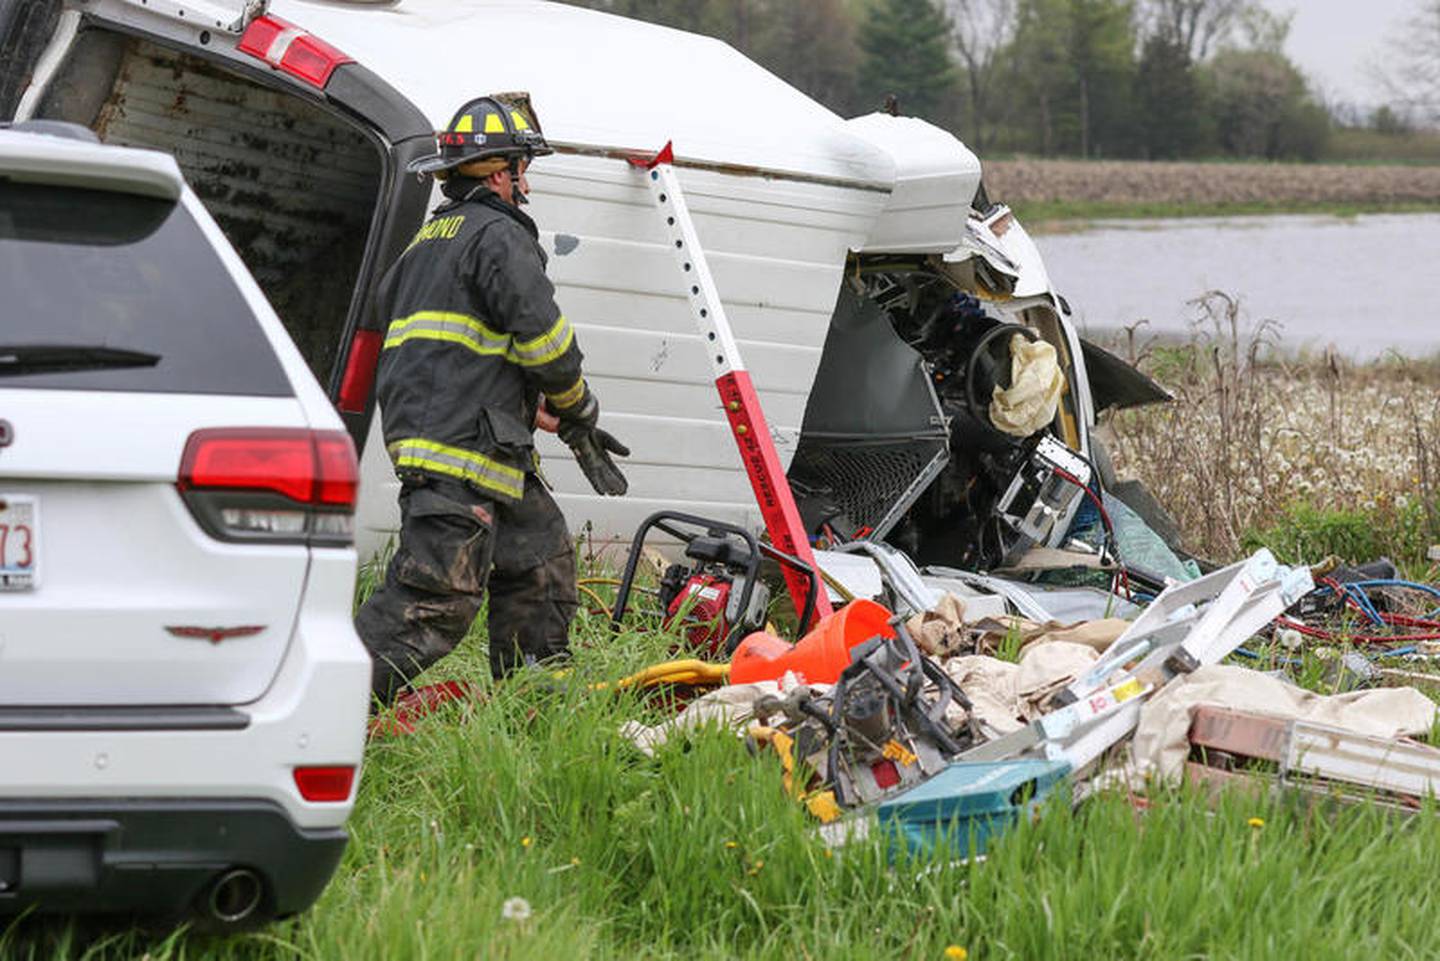 The McHenry County Sheriff's Office responded to a fatal crash near Hebron on Monday, May 18, 2020. William P. Bishop was charged with murder in connection with the crash.